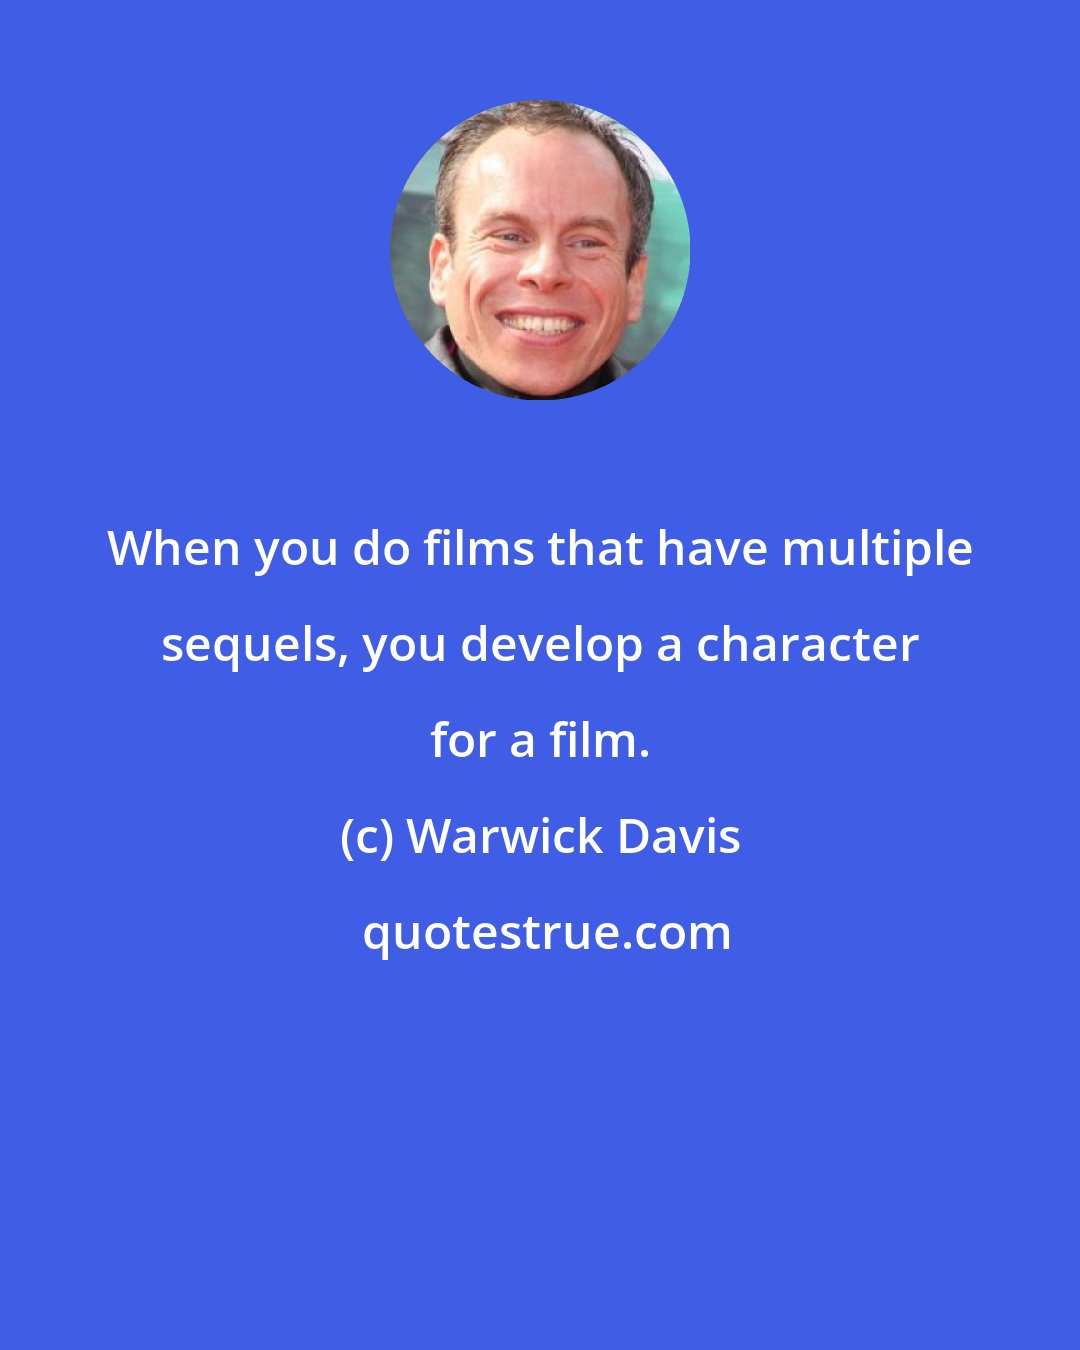 Warwick Davis: When you do films that have multiple sequels, you develop a character for a film.